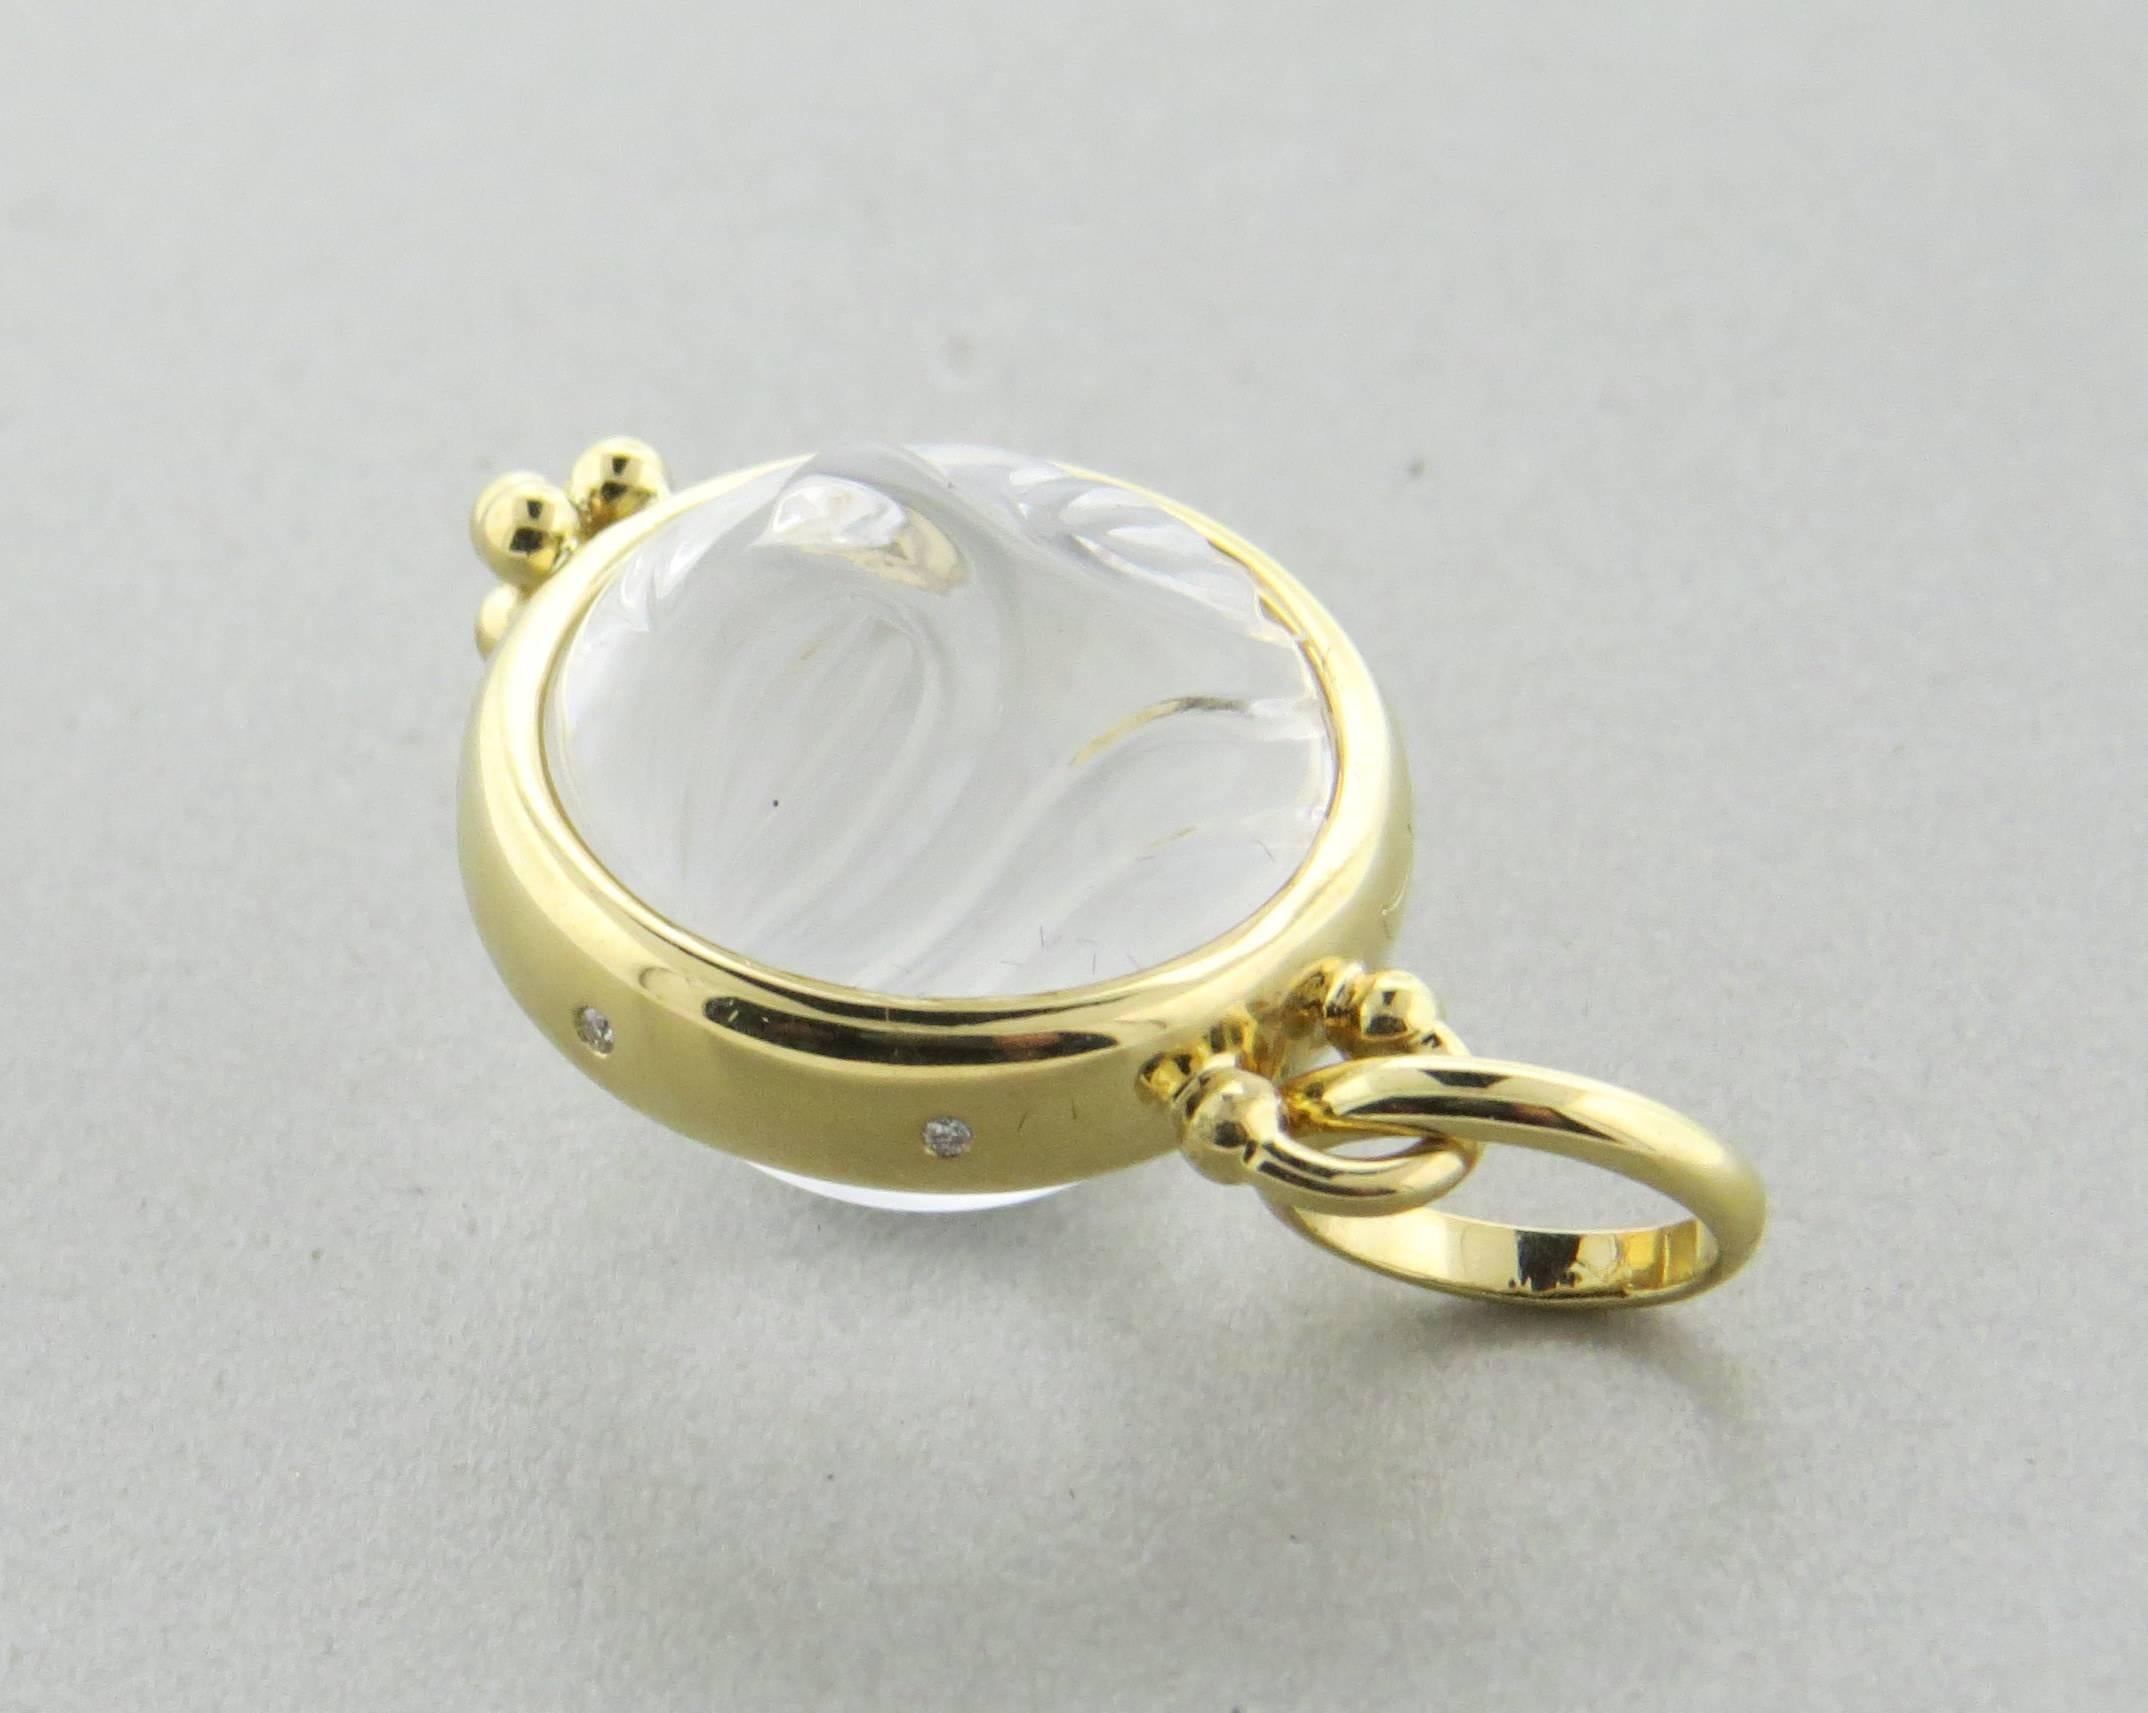 An 18k yellow gold pendant charm, crafted by Temple St. Clair, featuring carved 23ct crystal, depicting moonface, adorned with diamonds on sides. Pendant is 25mm long without bale x 18mm wide, with bale - 33mm long . Marked with Temple hallmark and